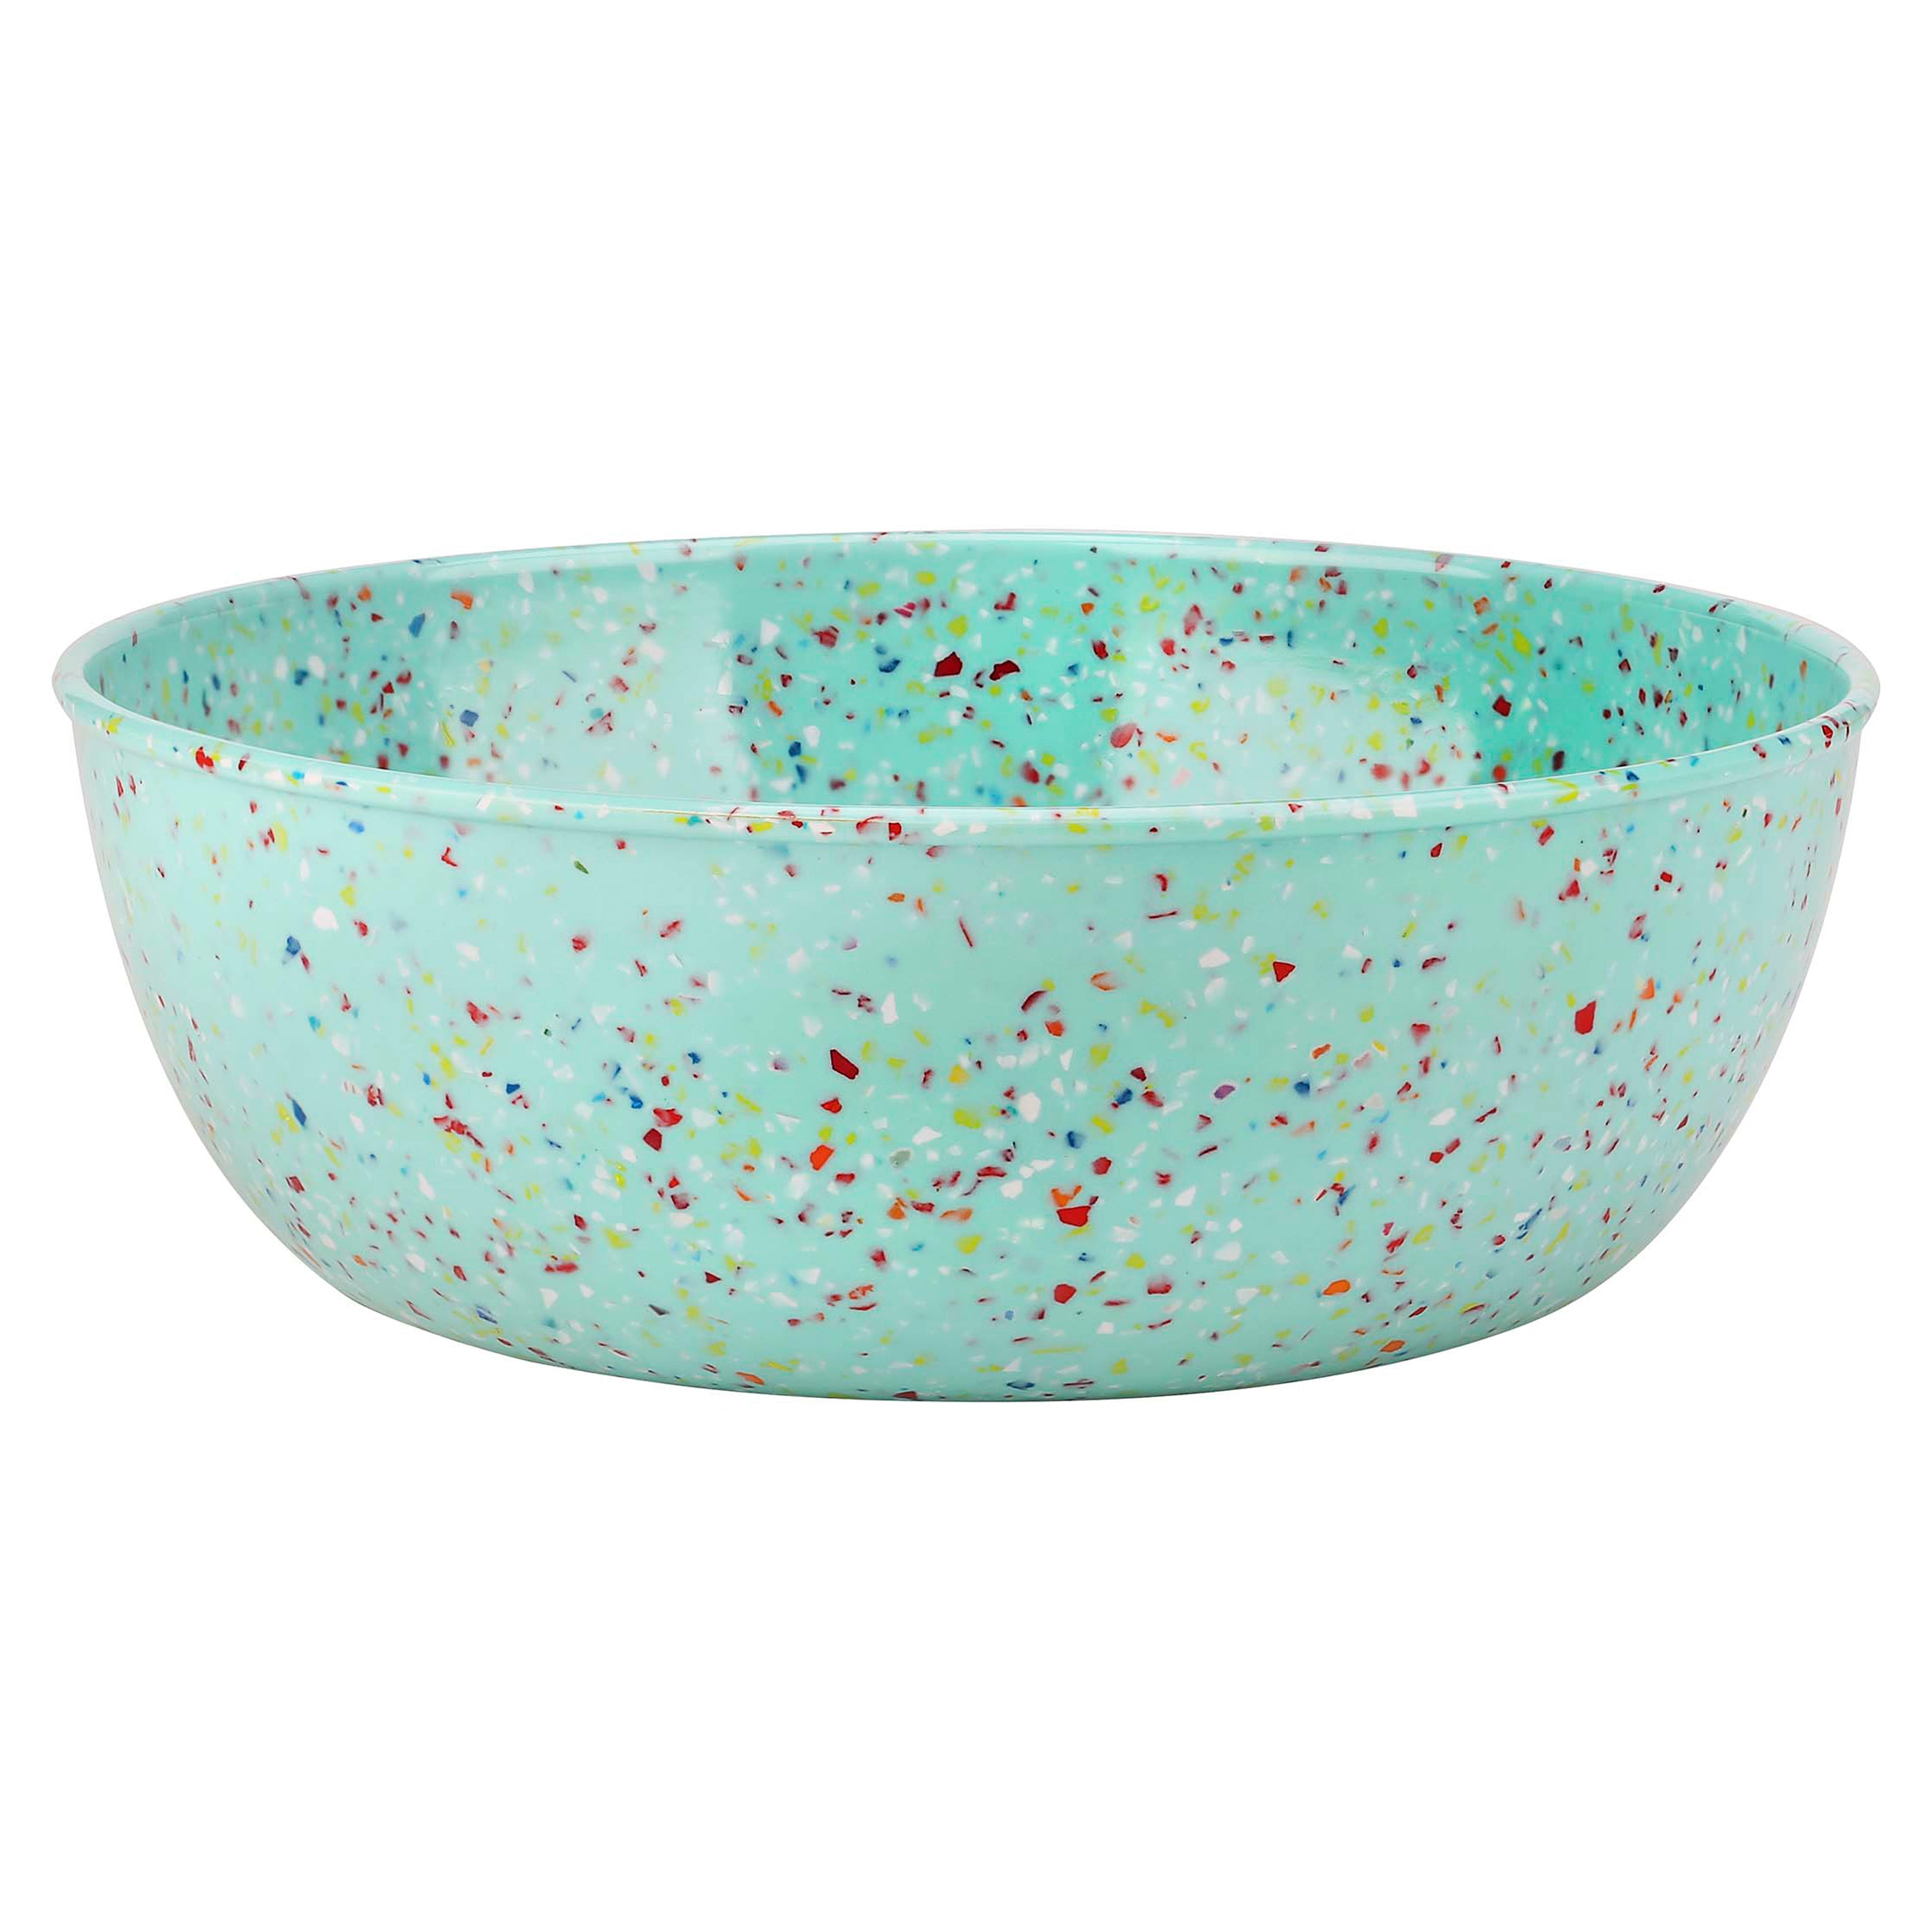 Confetti Melamine Serving Bowl - Durable, Recycled Plates and Bowls - 3 Quart